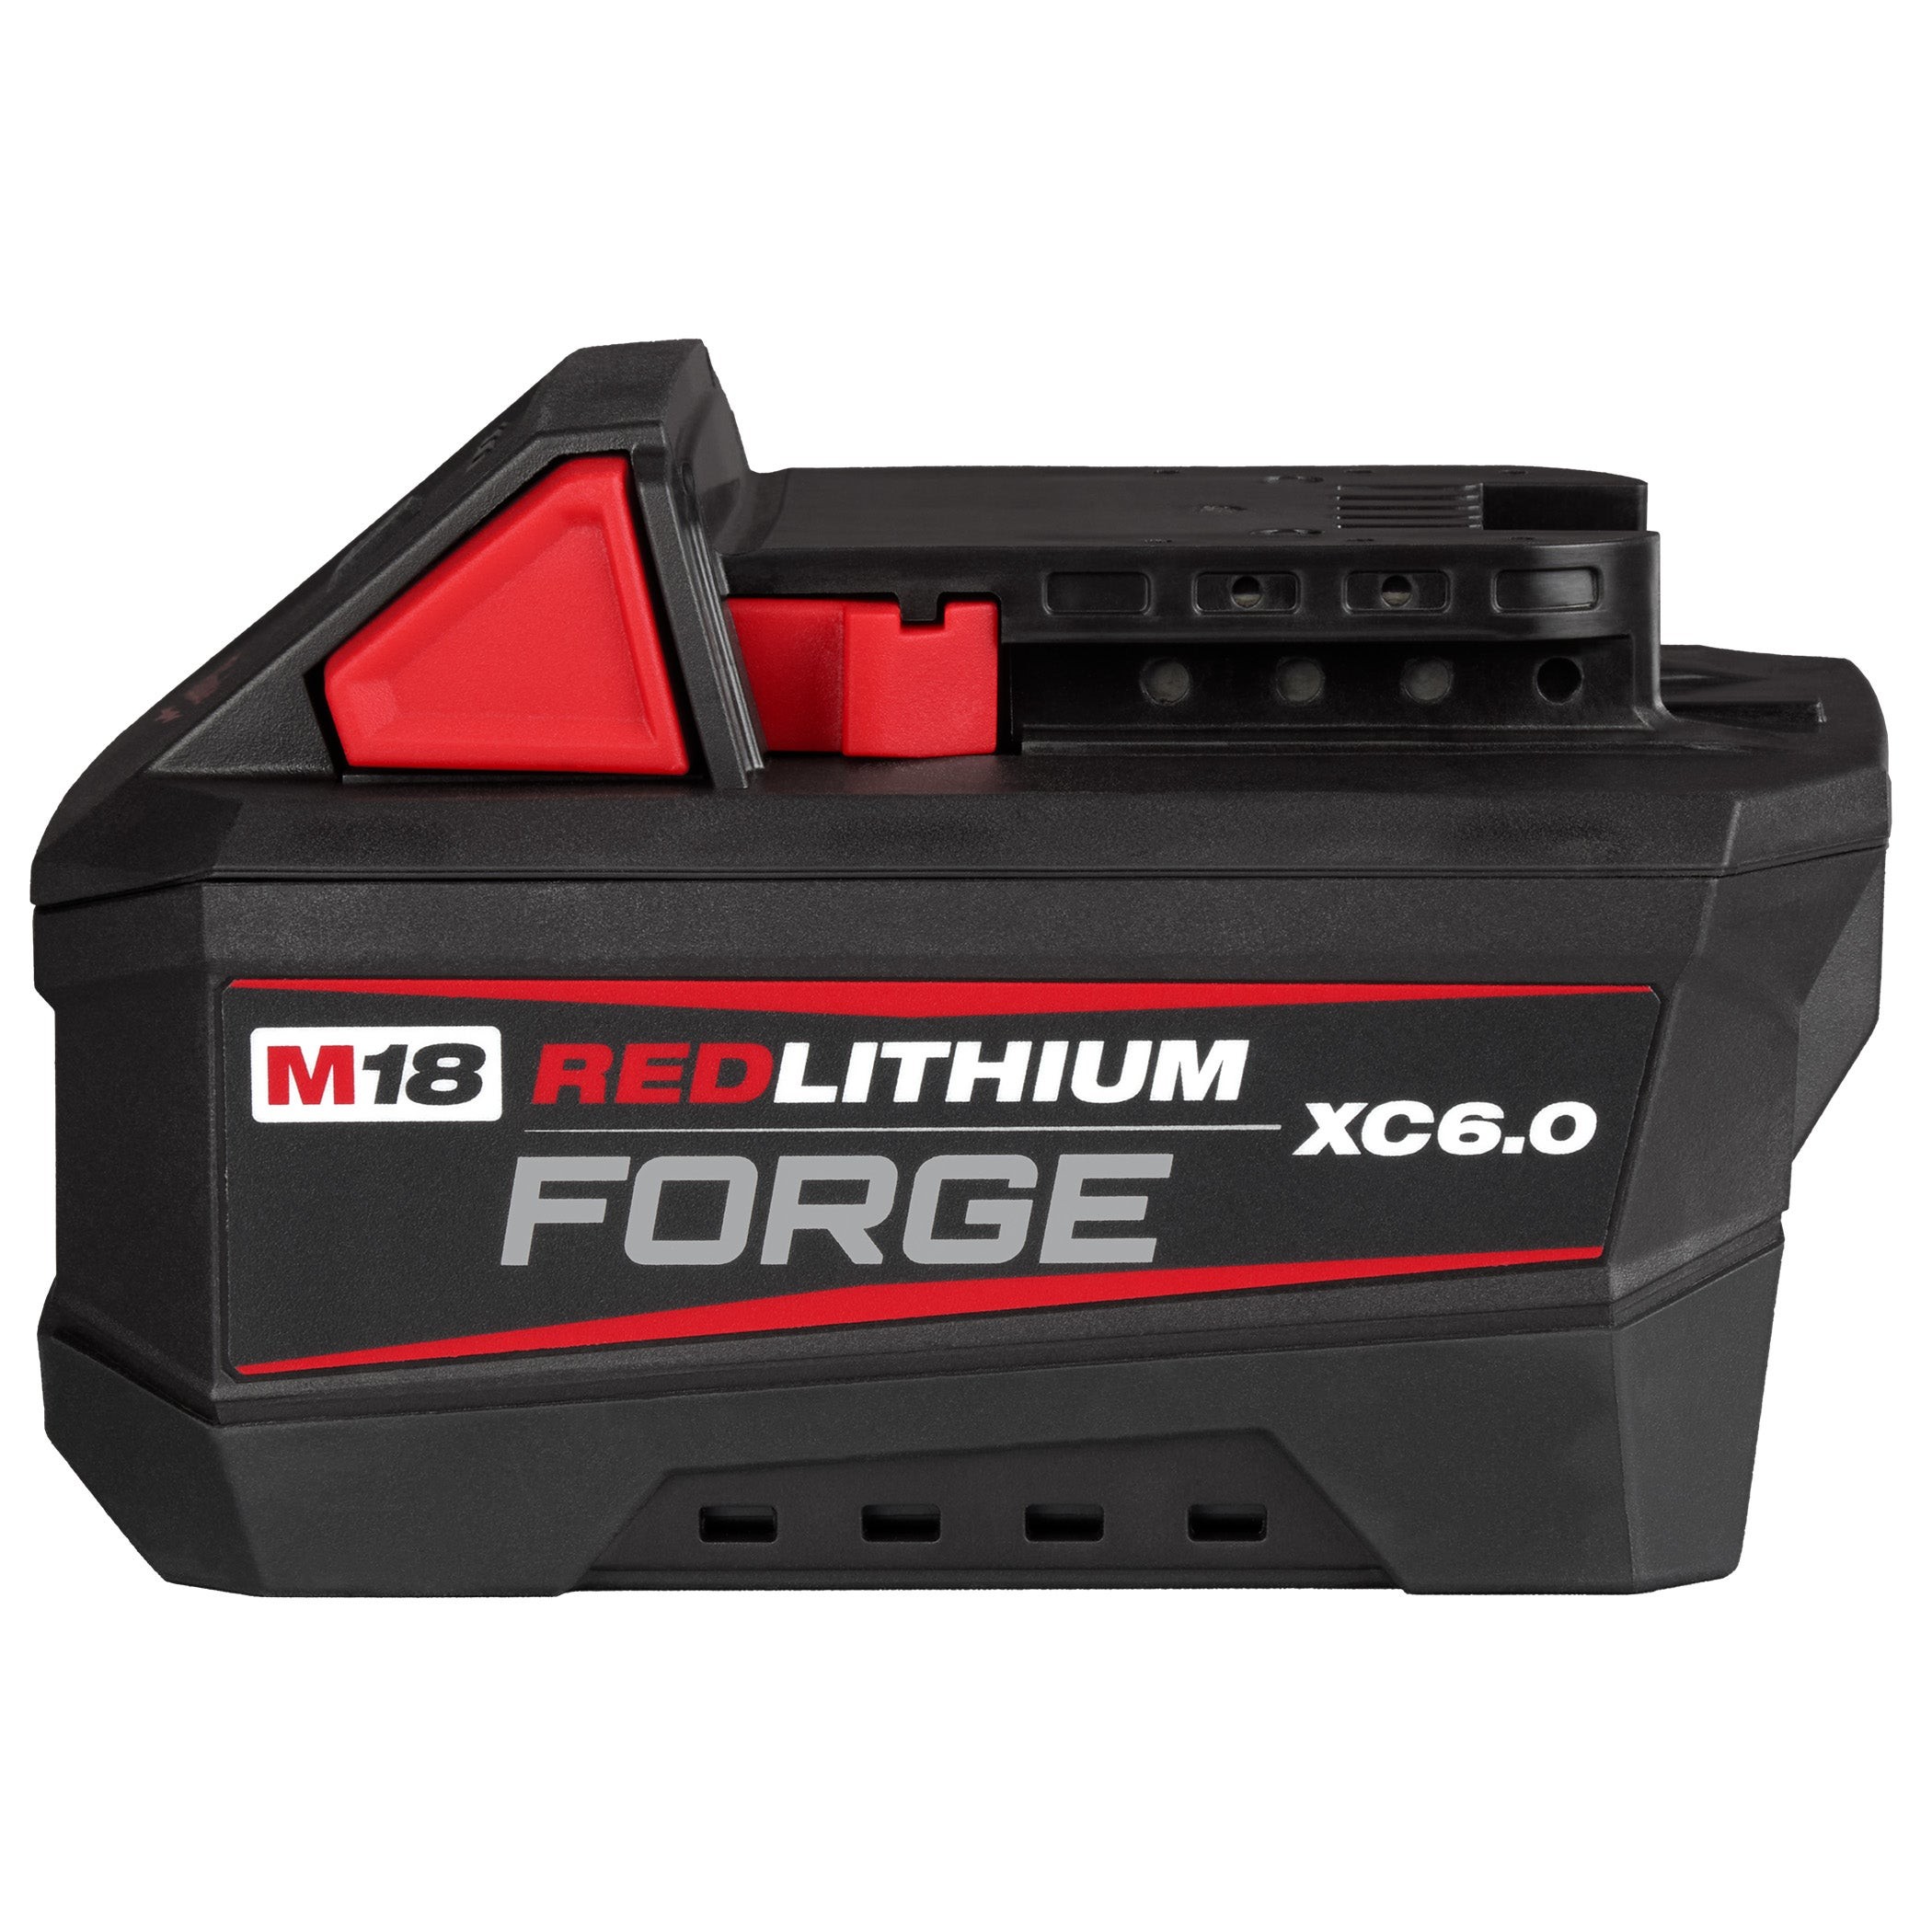 M18 REDLITHIUM FORGE XC6.0 Battery Pack